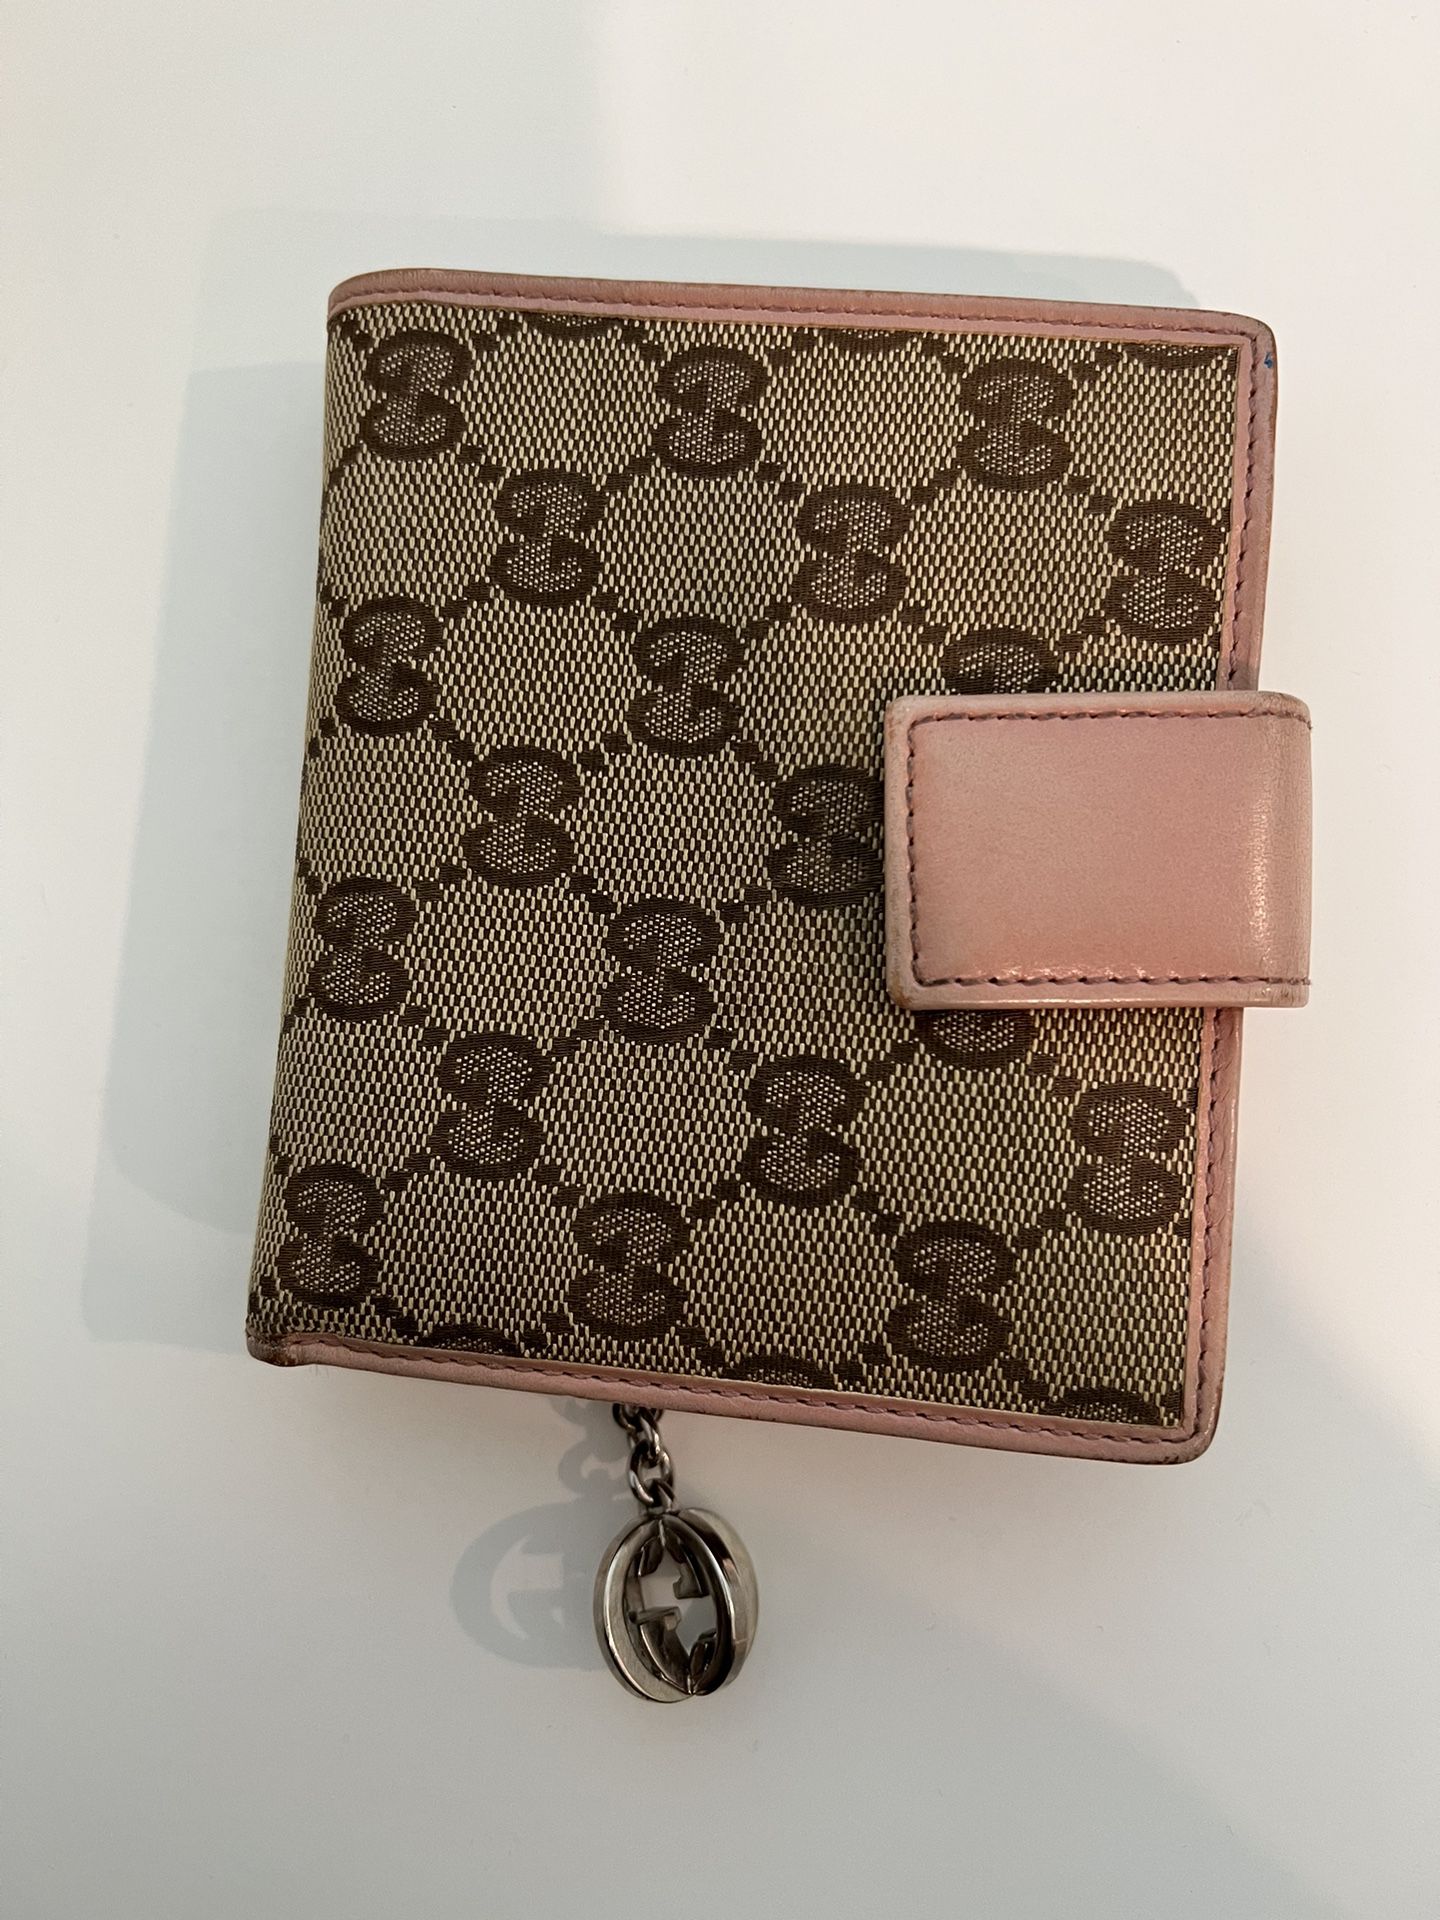 Authentic Gucci Wallet